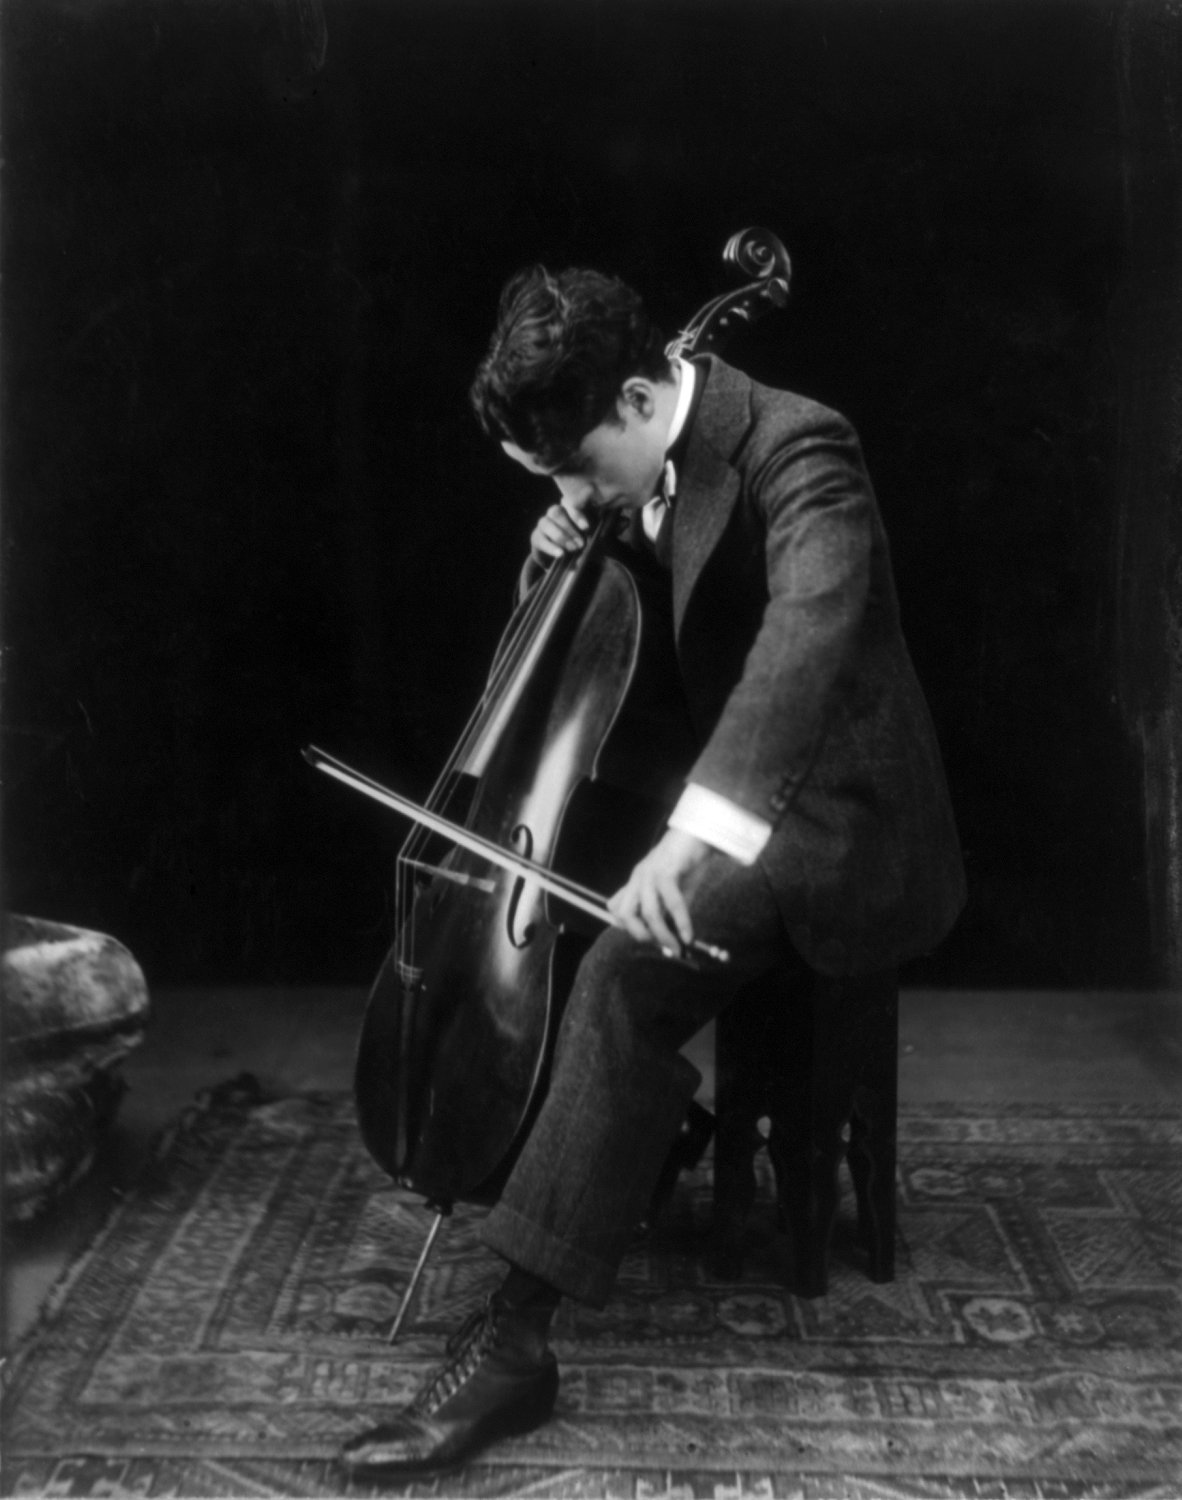 Charlie Chaplin playing the cello in 1915